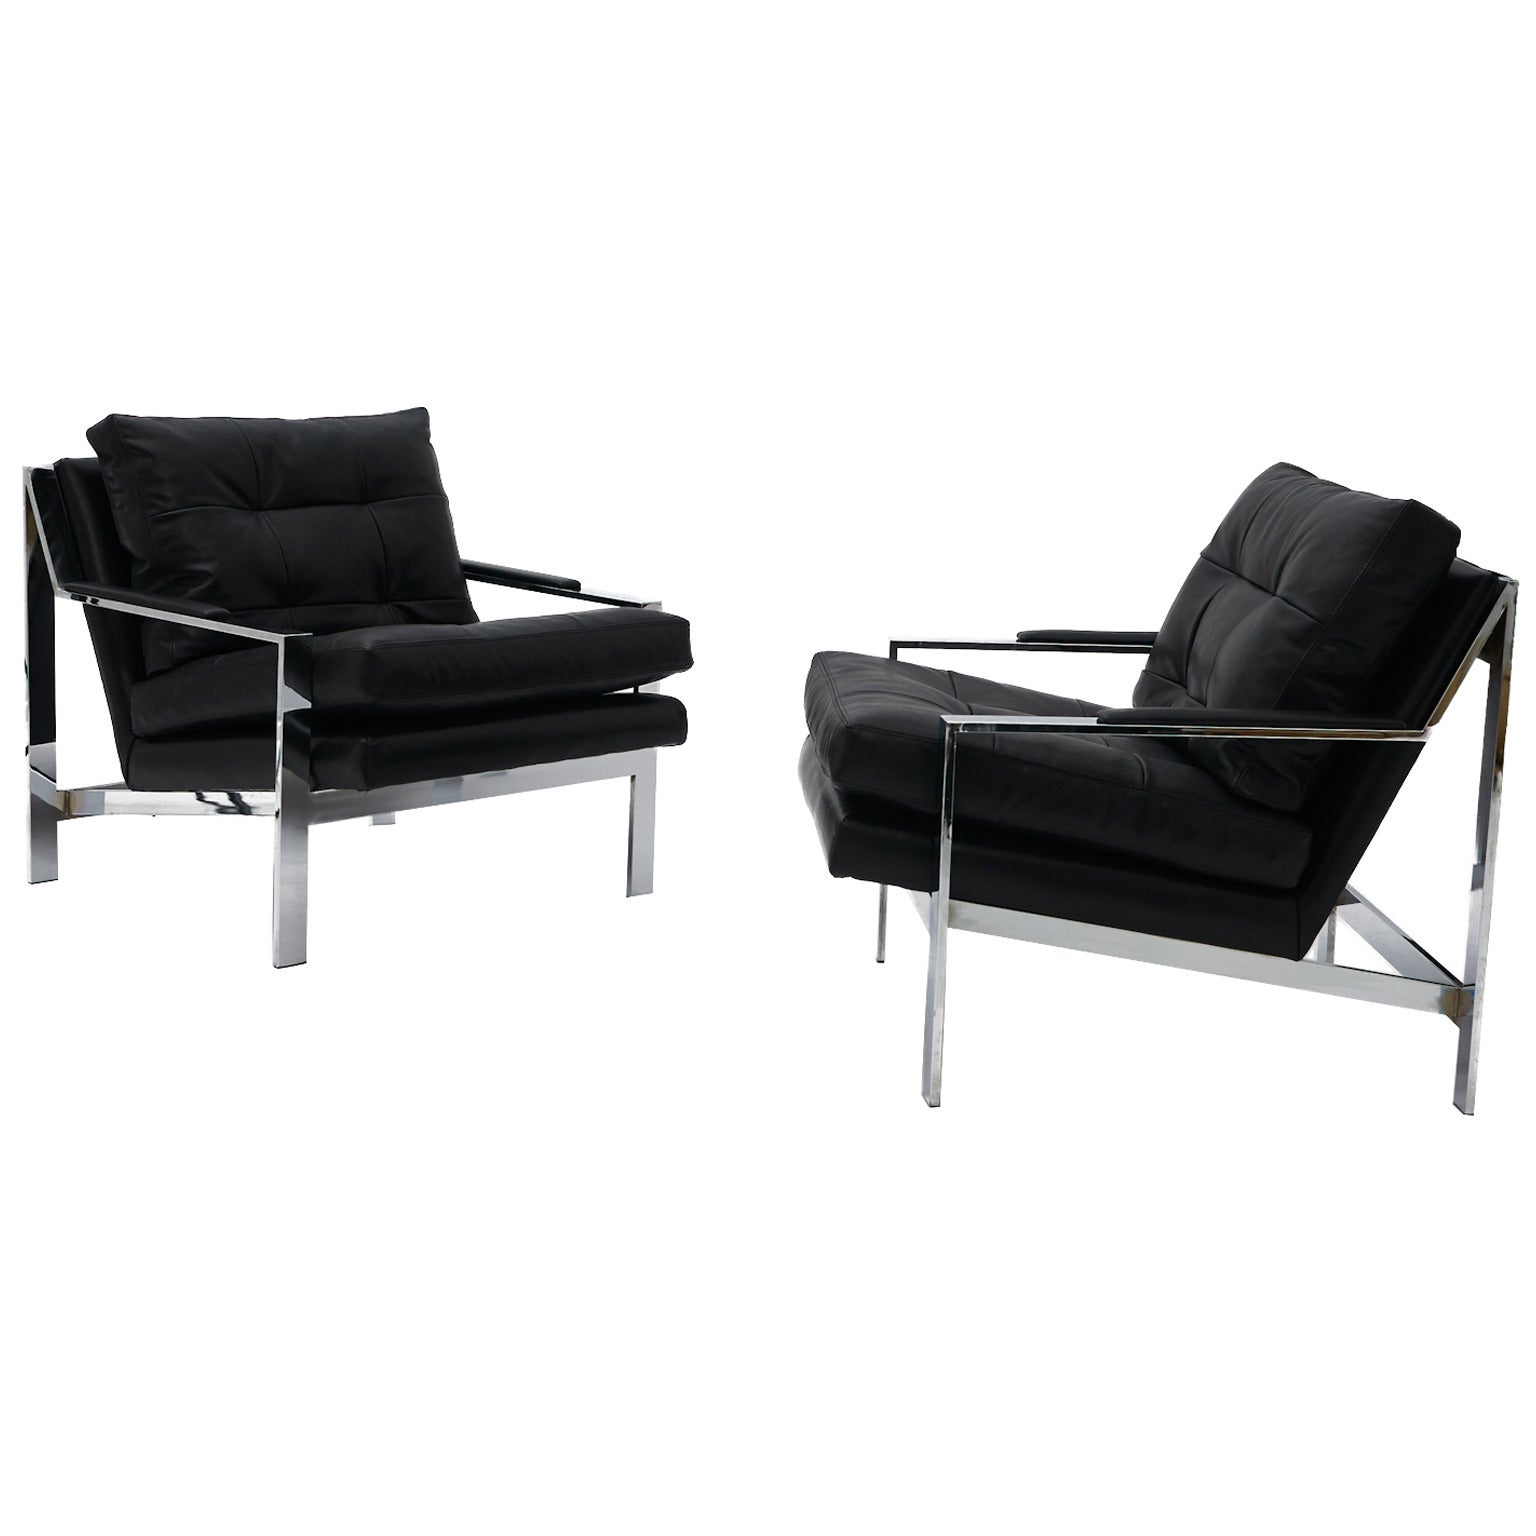 Pair of Black Leather and Chrome Lounge Chairs